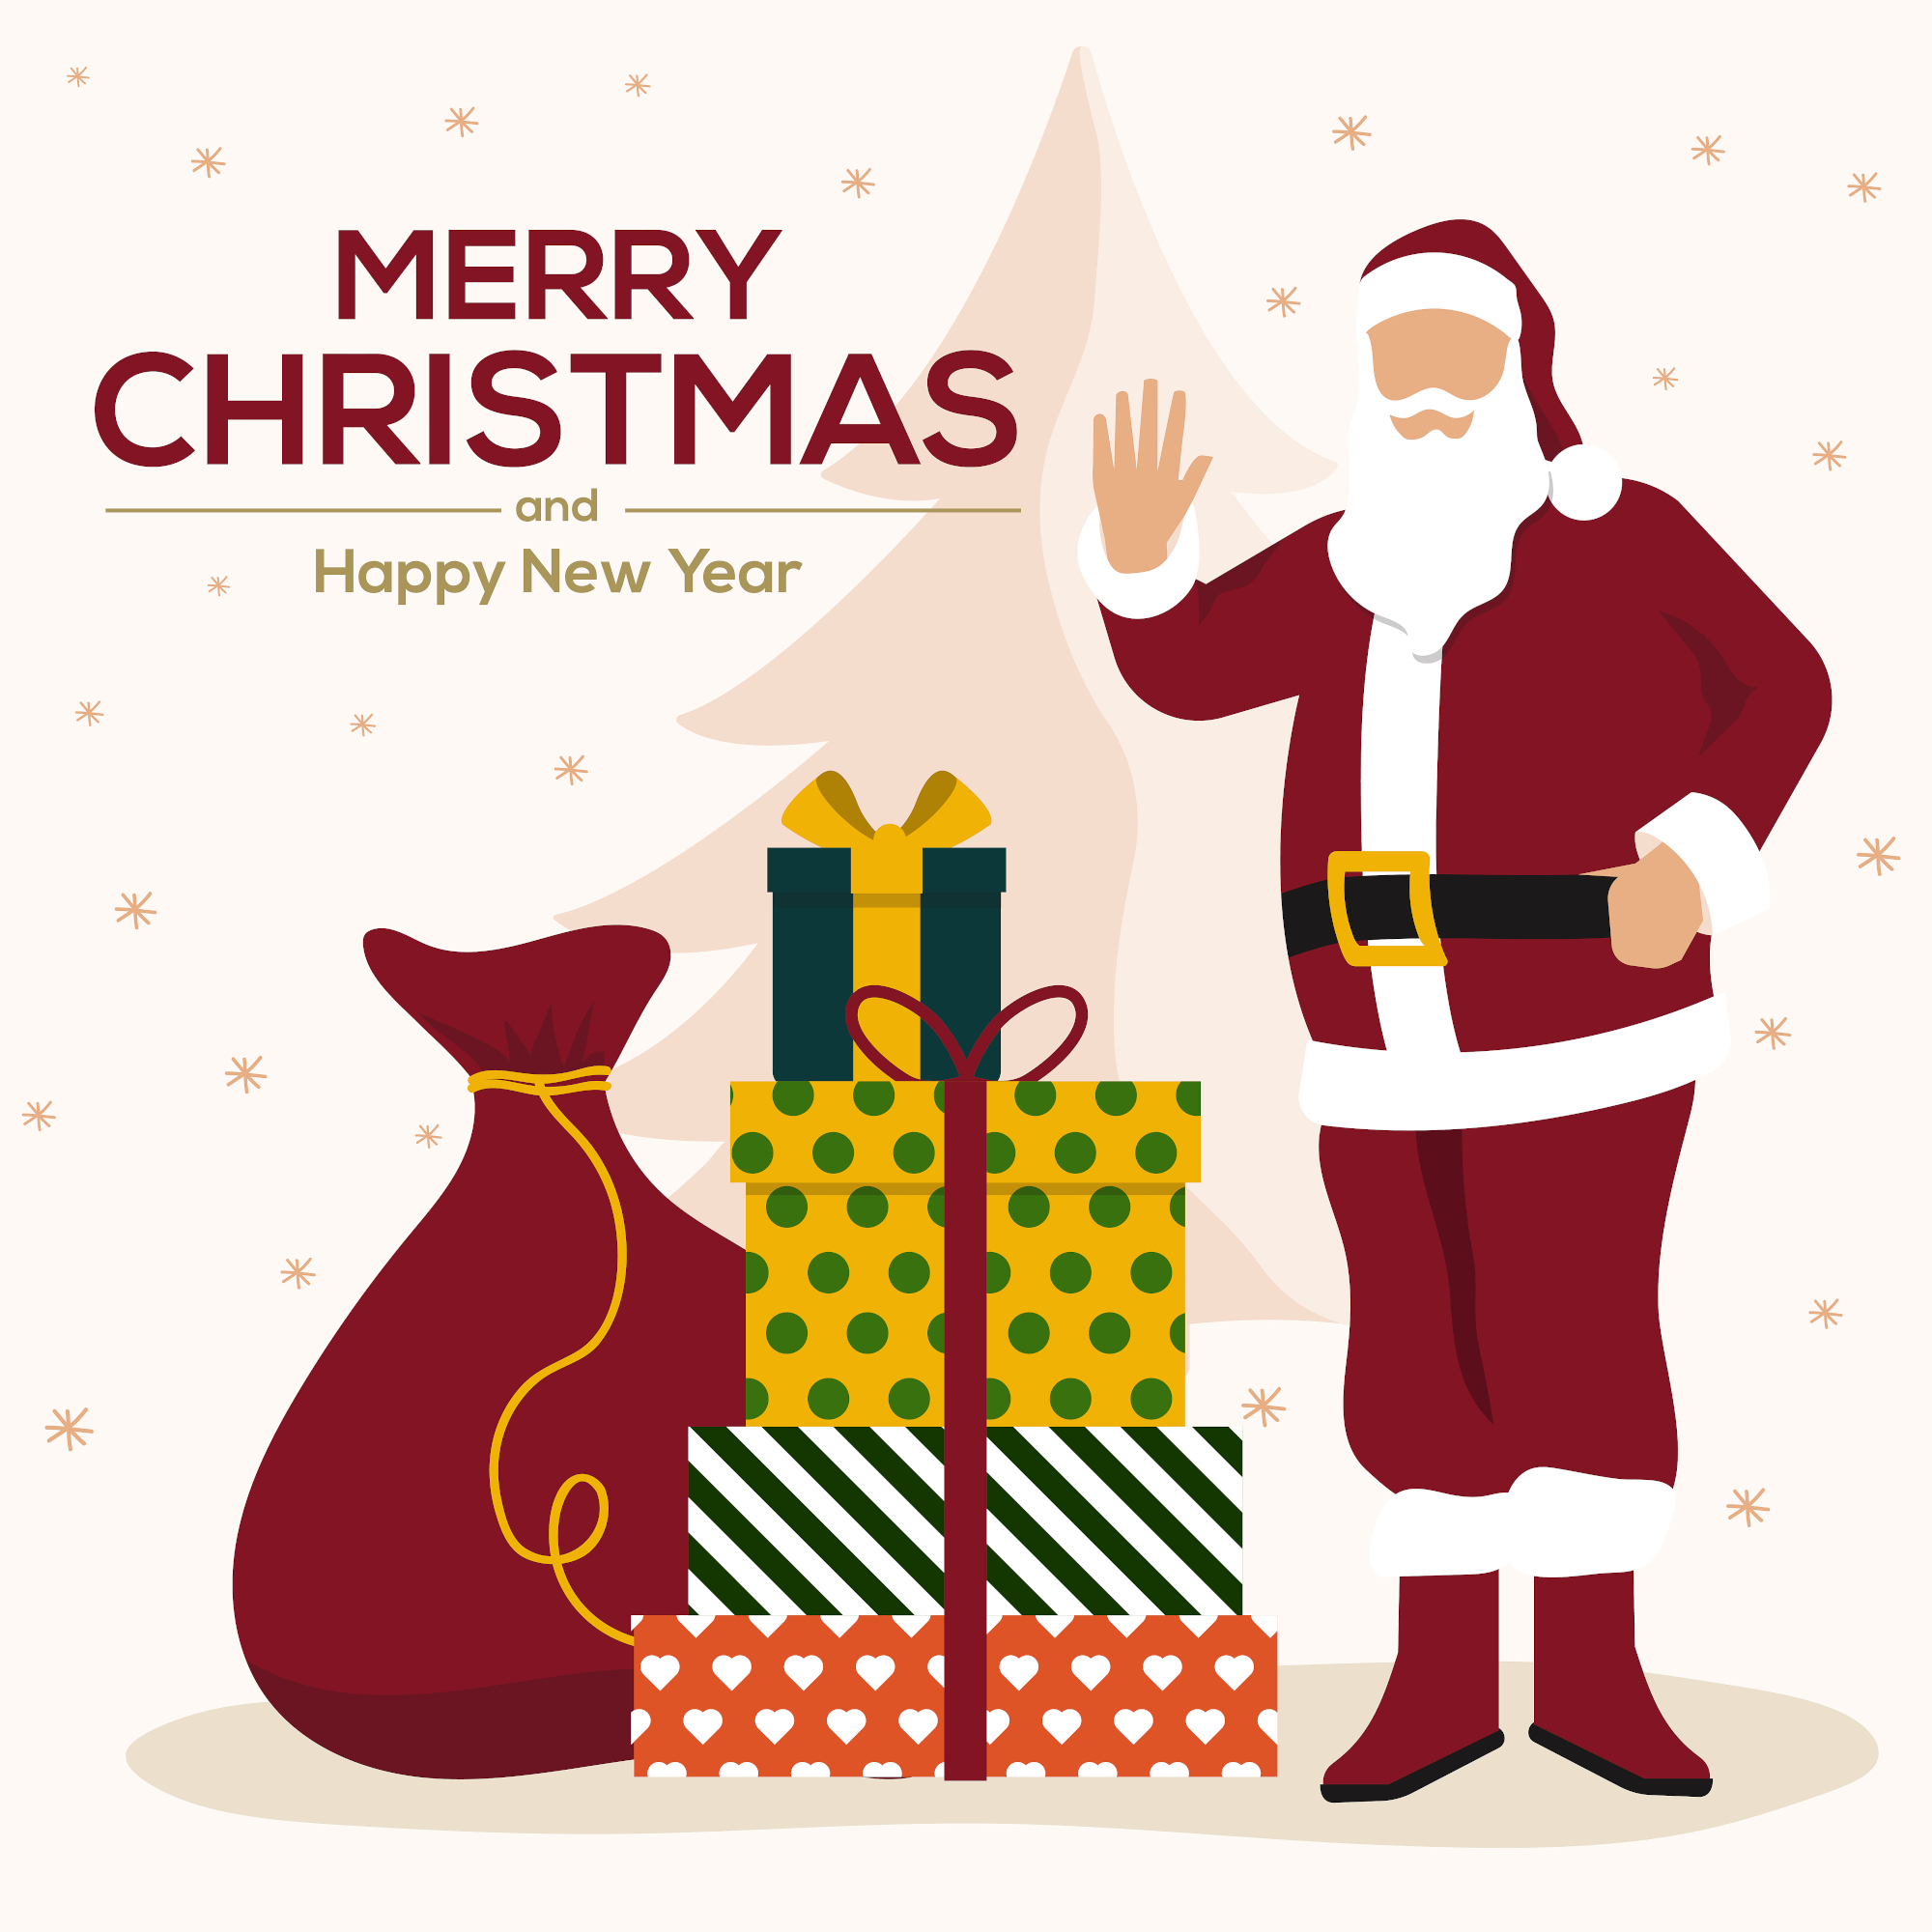 Christmas card. Santa Claus with huge red bag with presents and giftboxes. Can be used as Christmas and New Year posters, gift tags, greeting card and labels.